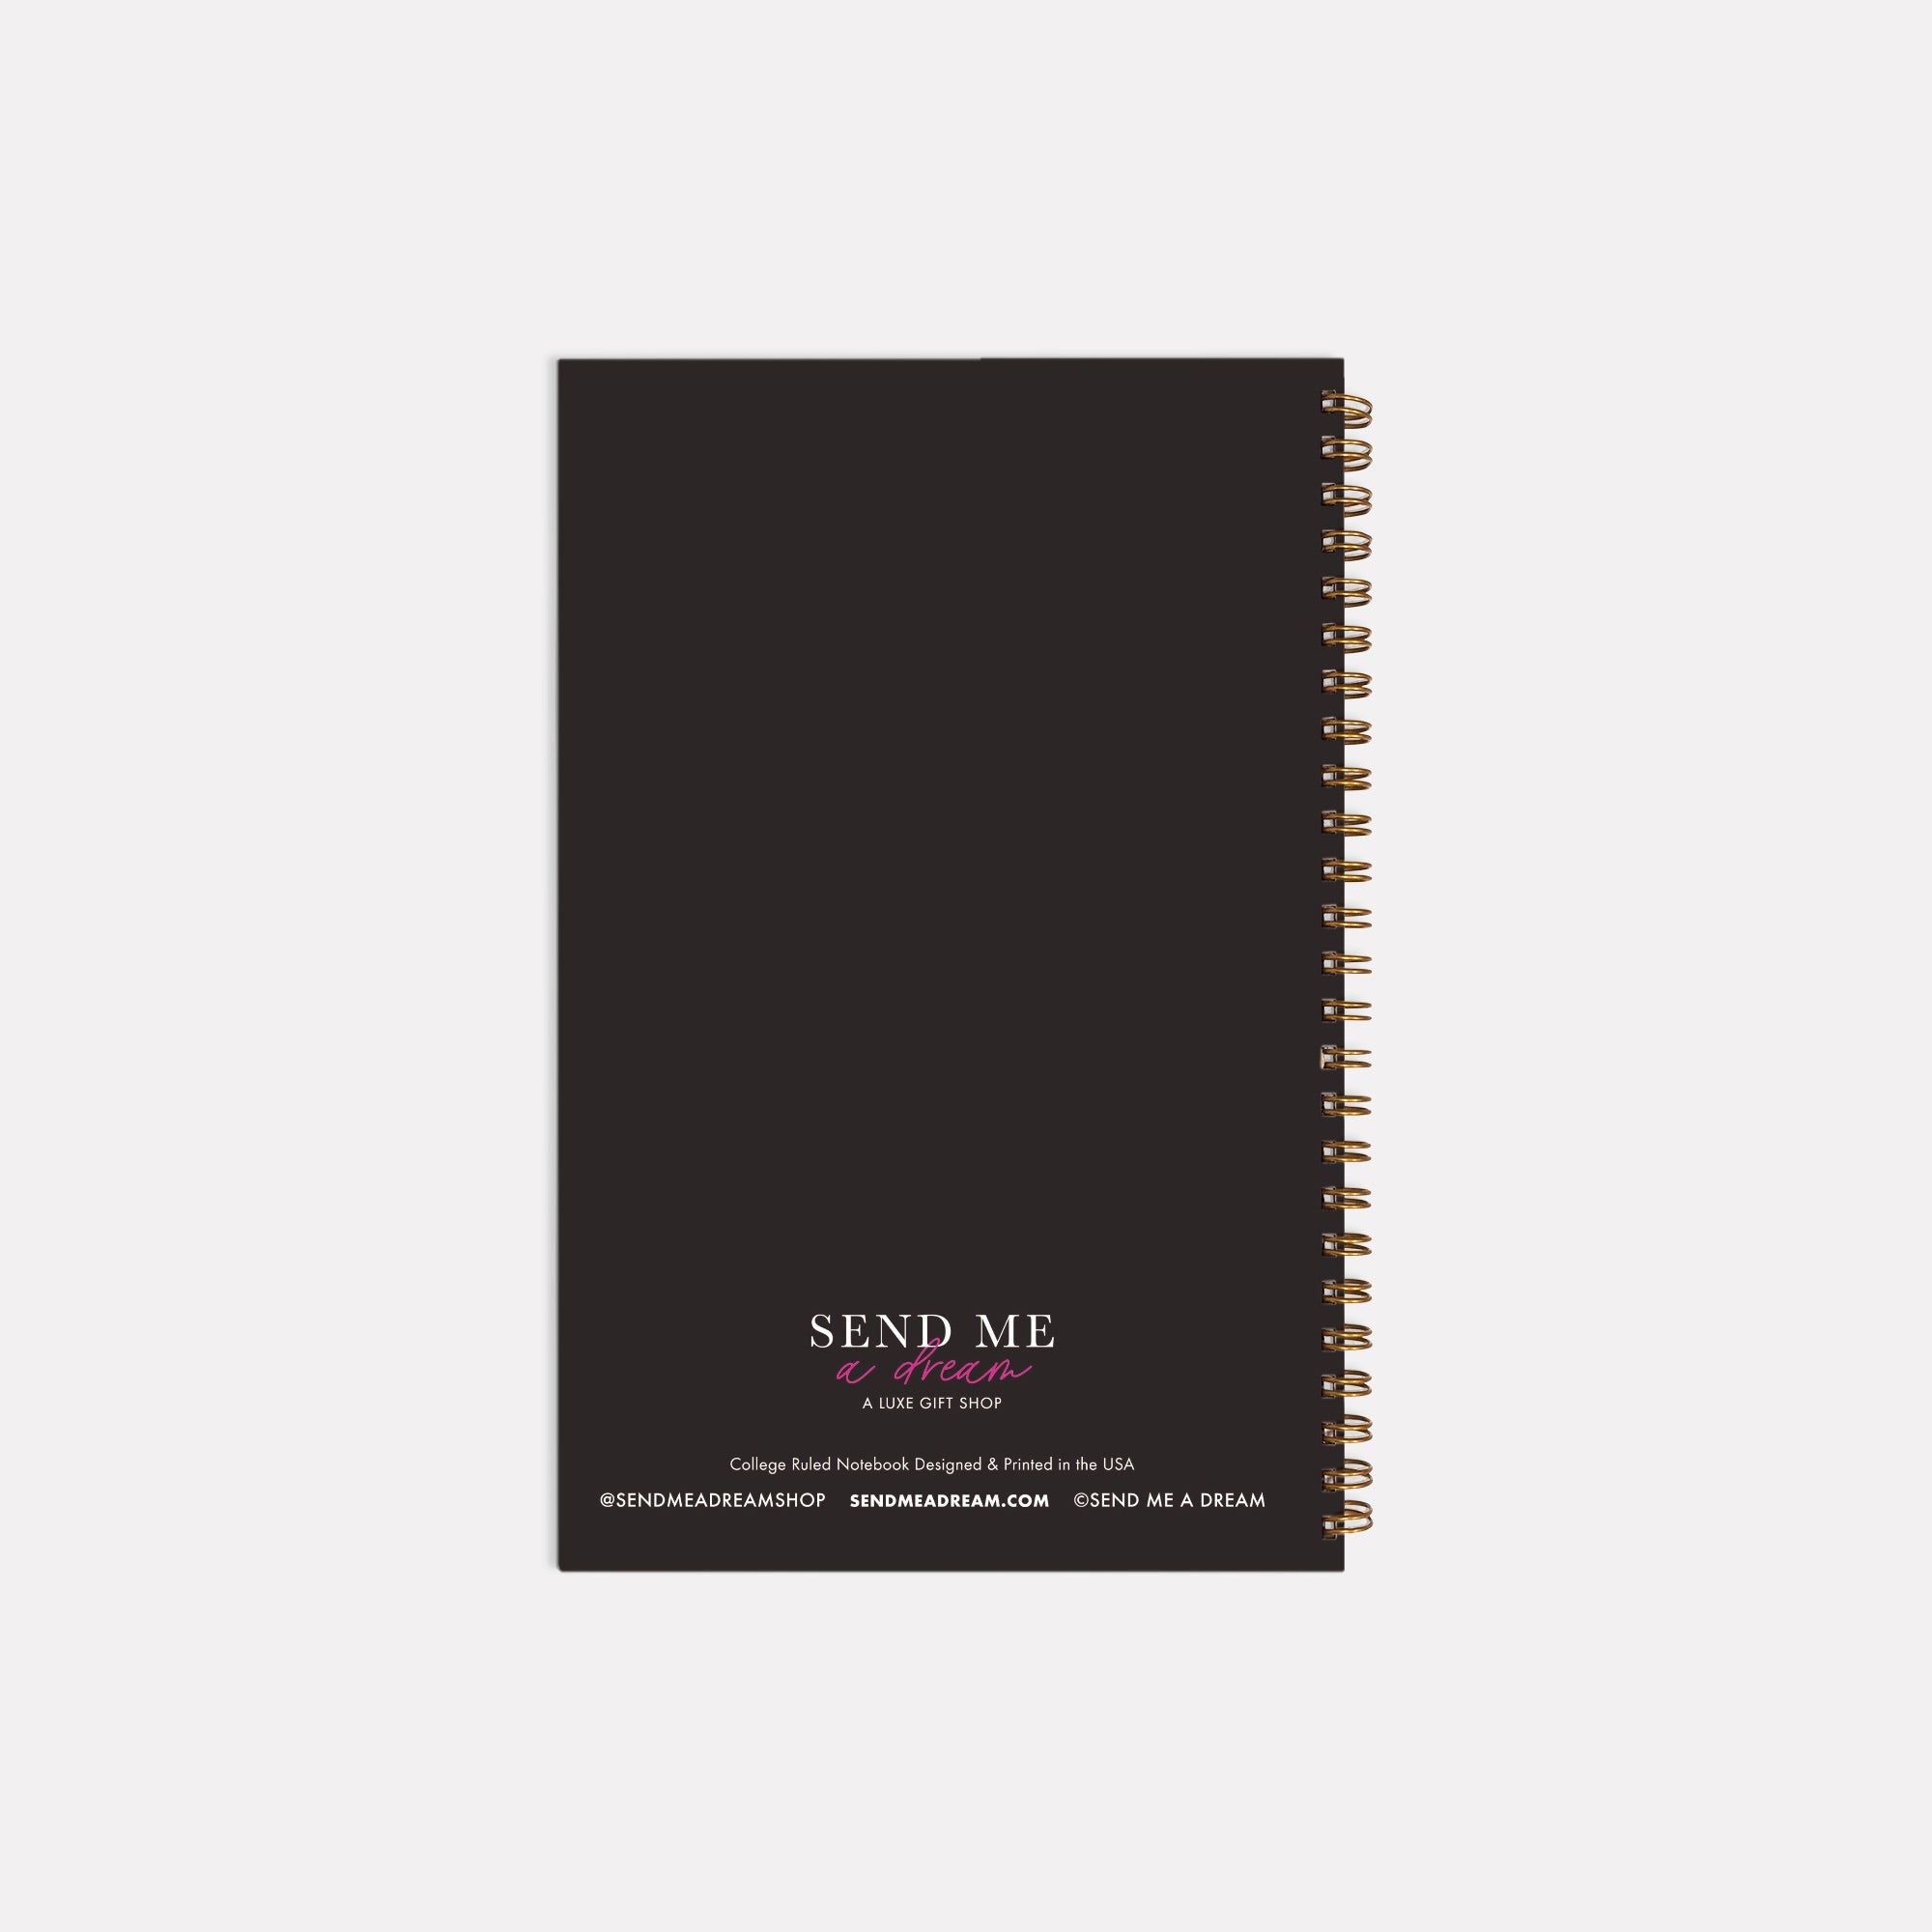 CEO VIBES Notebook Softcover Spiral 5.5 x 8.5